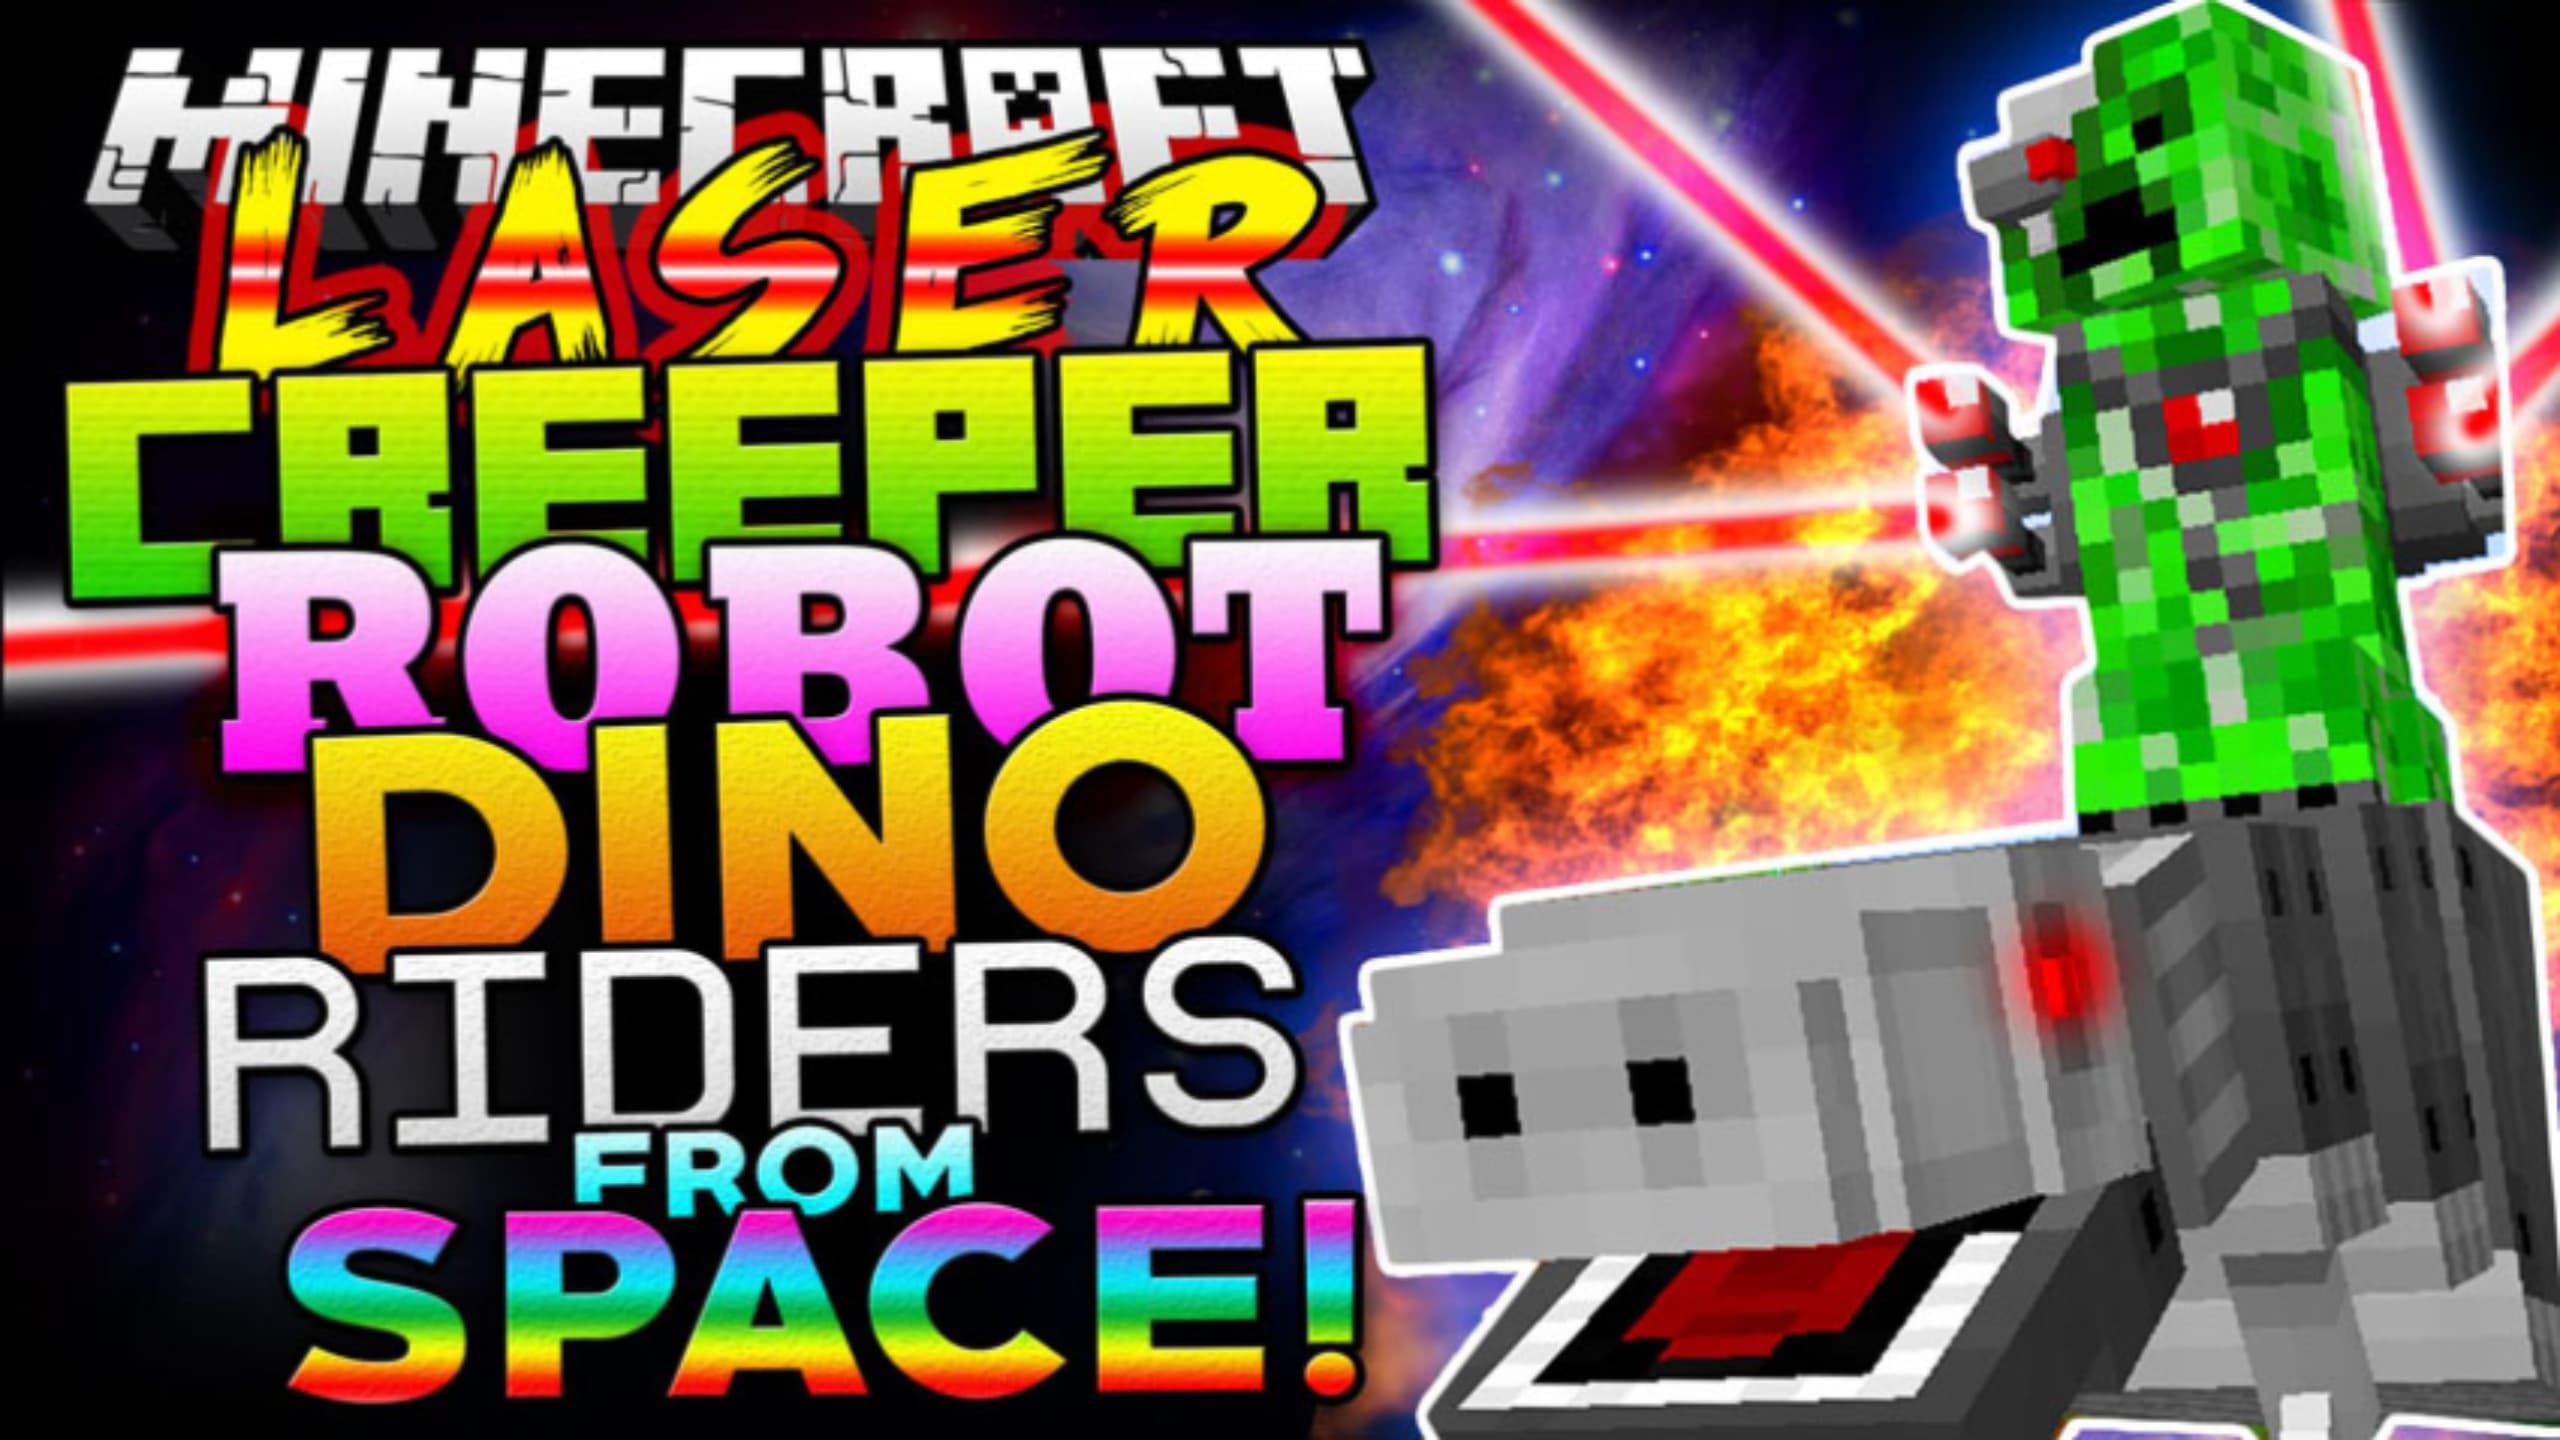 [Mod] Laser Creeper Robot Dino Riders From Space - 1.7.10 → 1.12.2